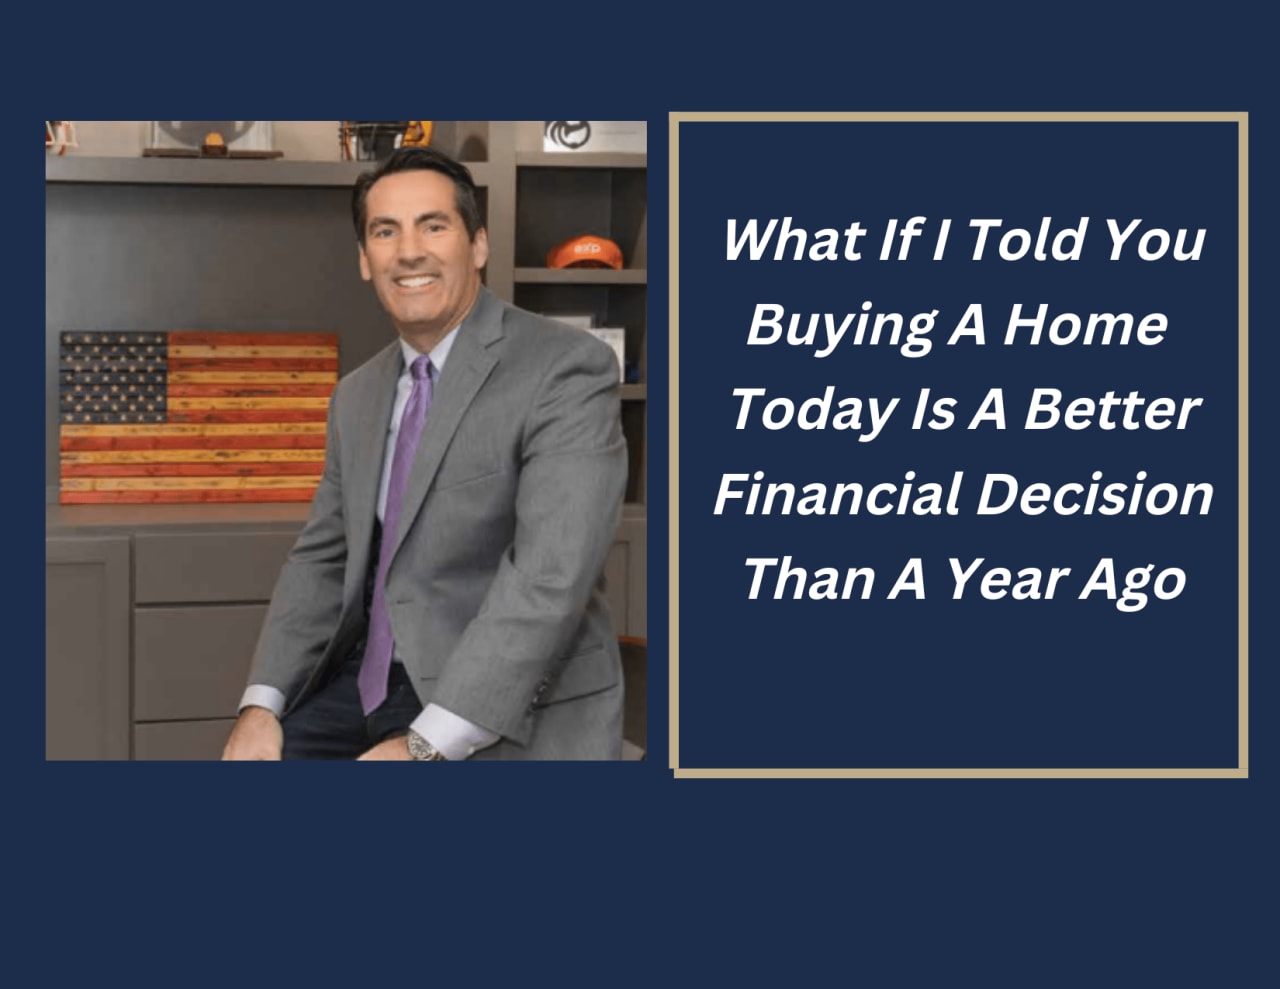 What If I Told You Buying A Home Today Is A Better Financial Decision Than A Year Ago